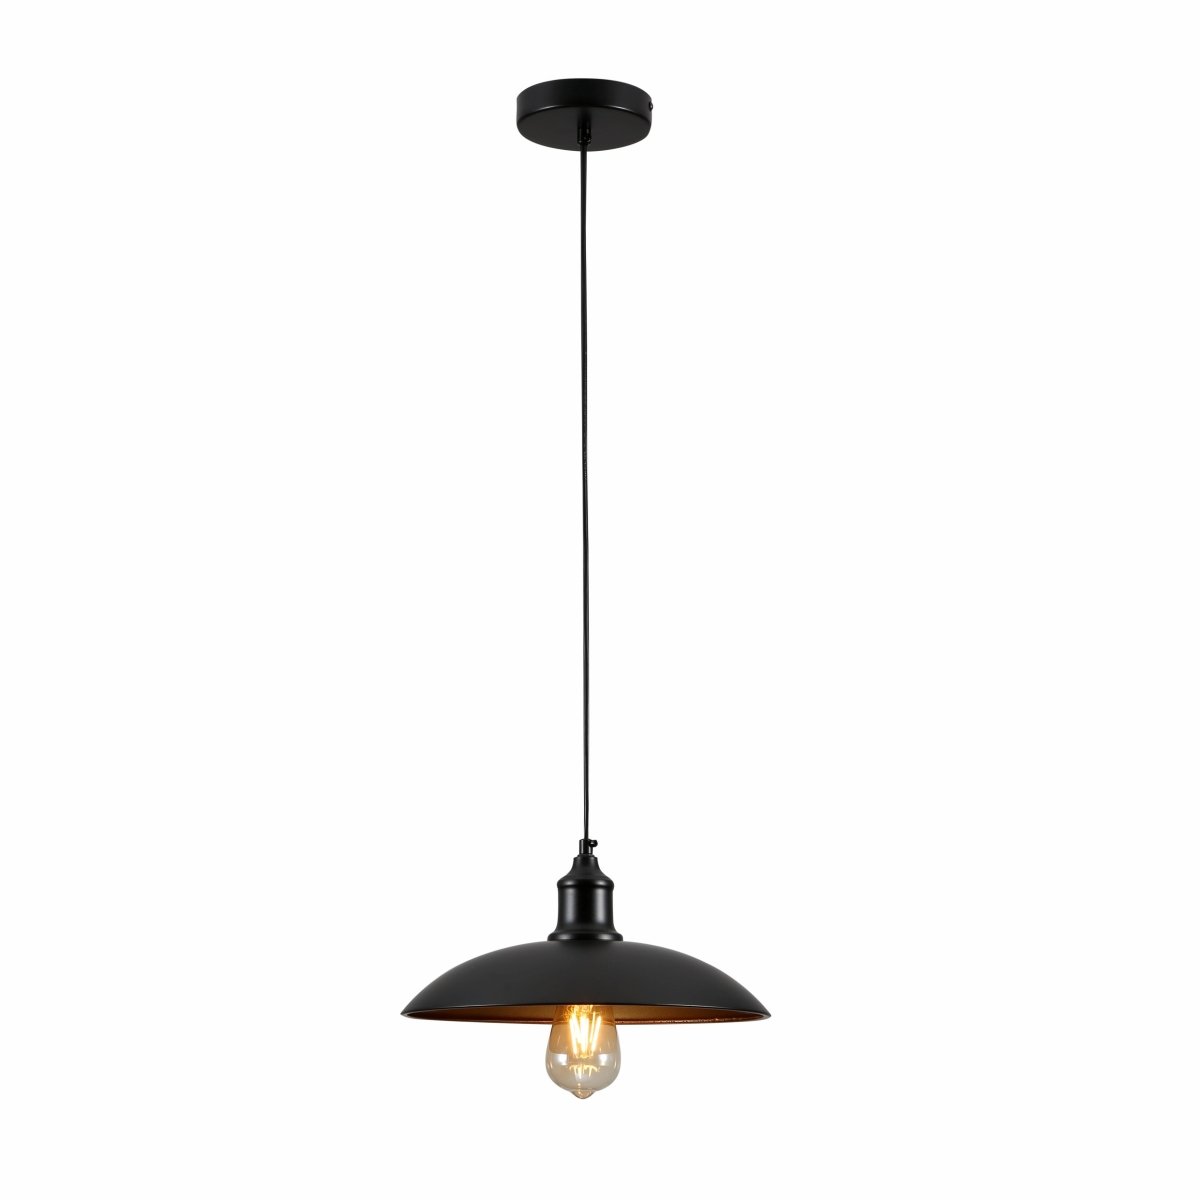 Main image of Black Flat Dome Industrial Metal Ceiling Pendant Light with E27 Fitting | TEKLED 150-18354